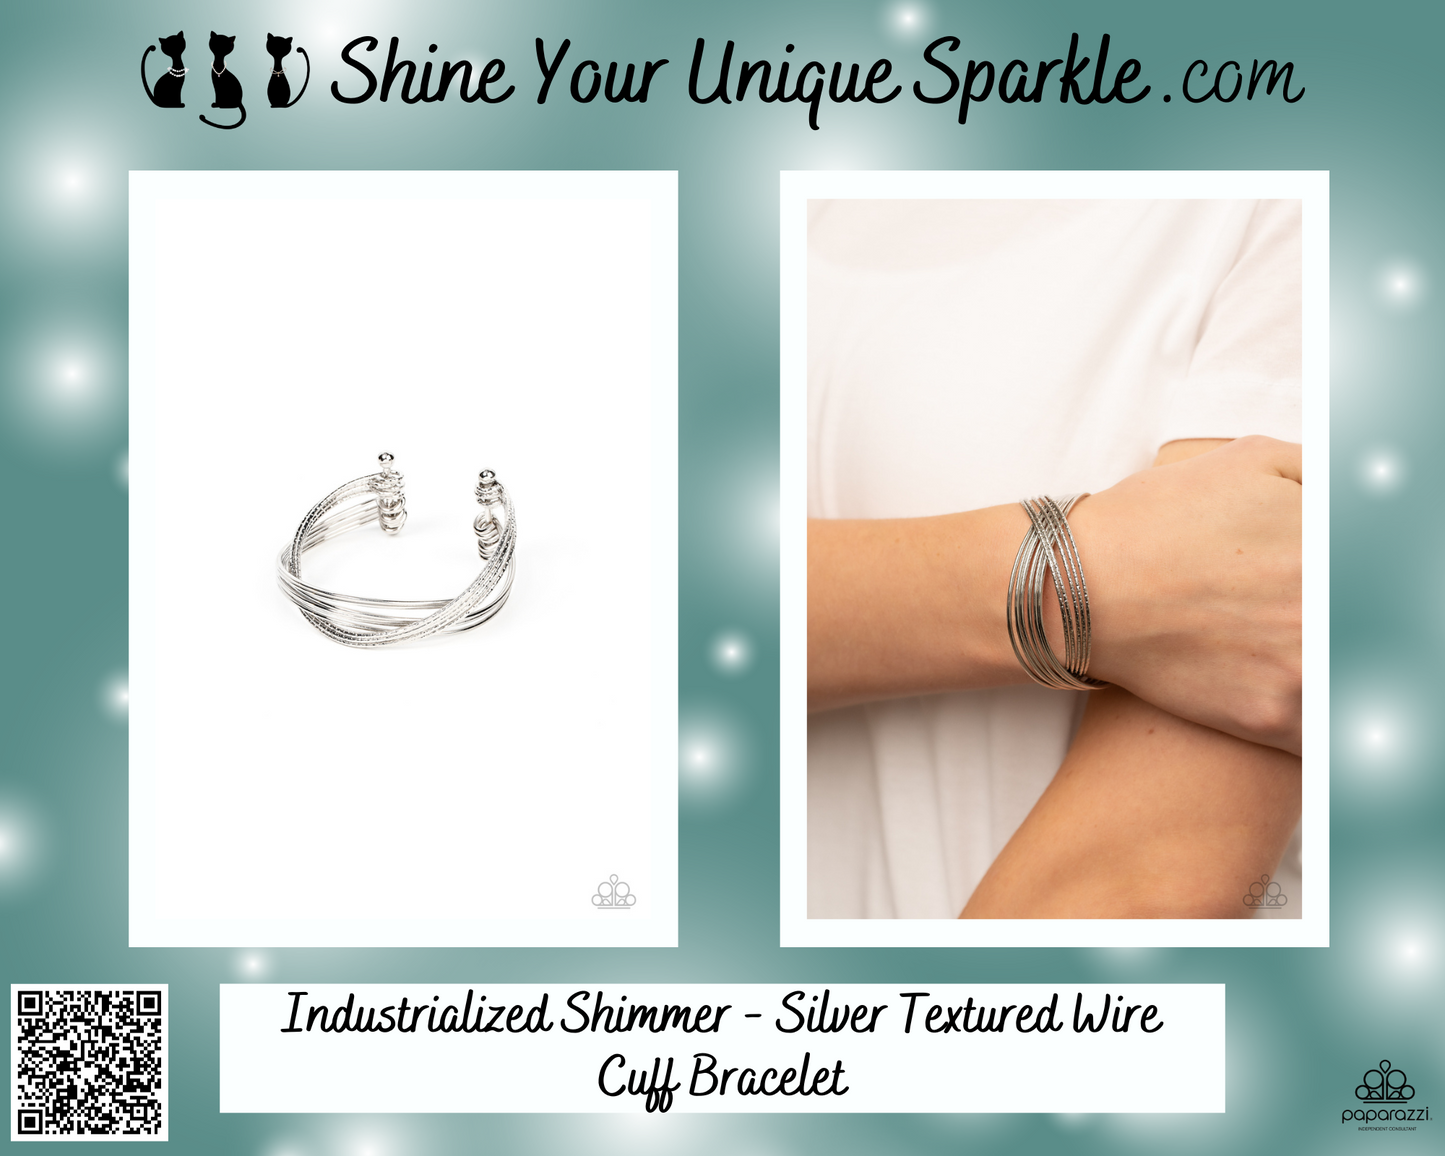 Industrialized Shimmer - Silver Textured Wire Cuff Bracelet